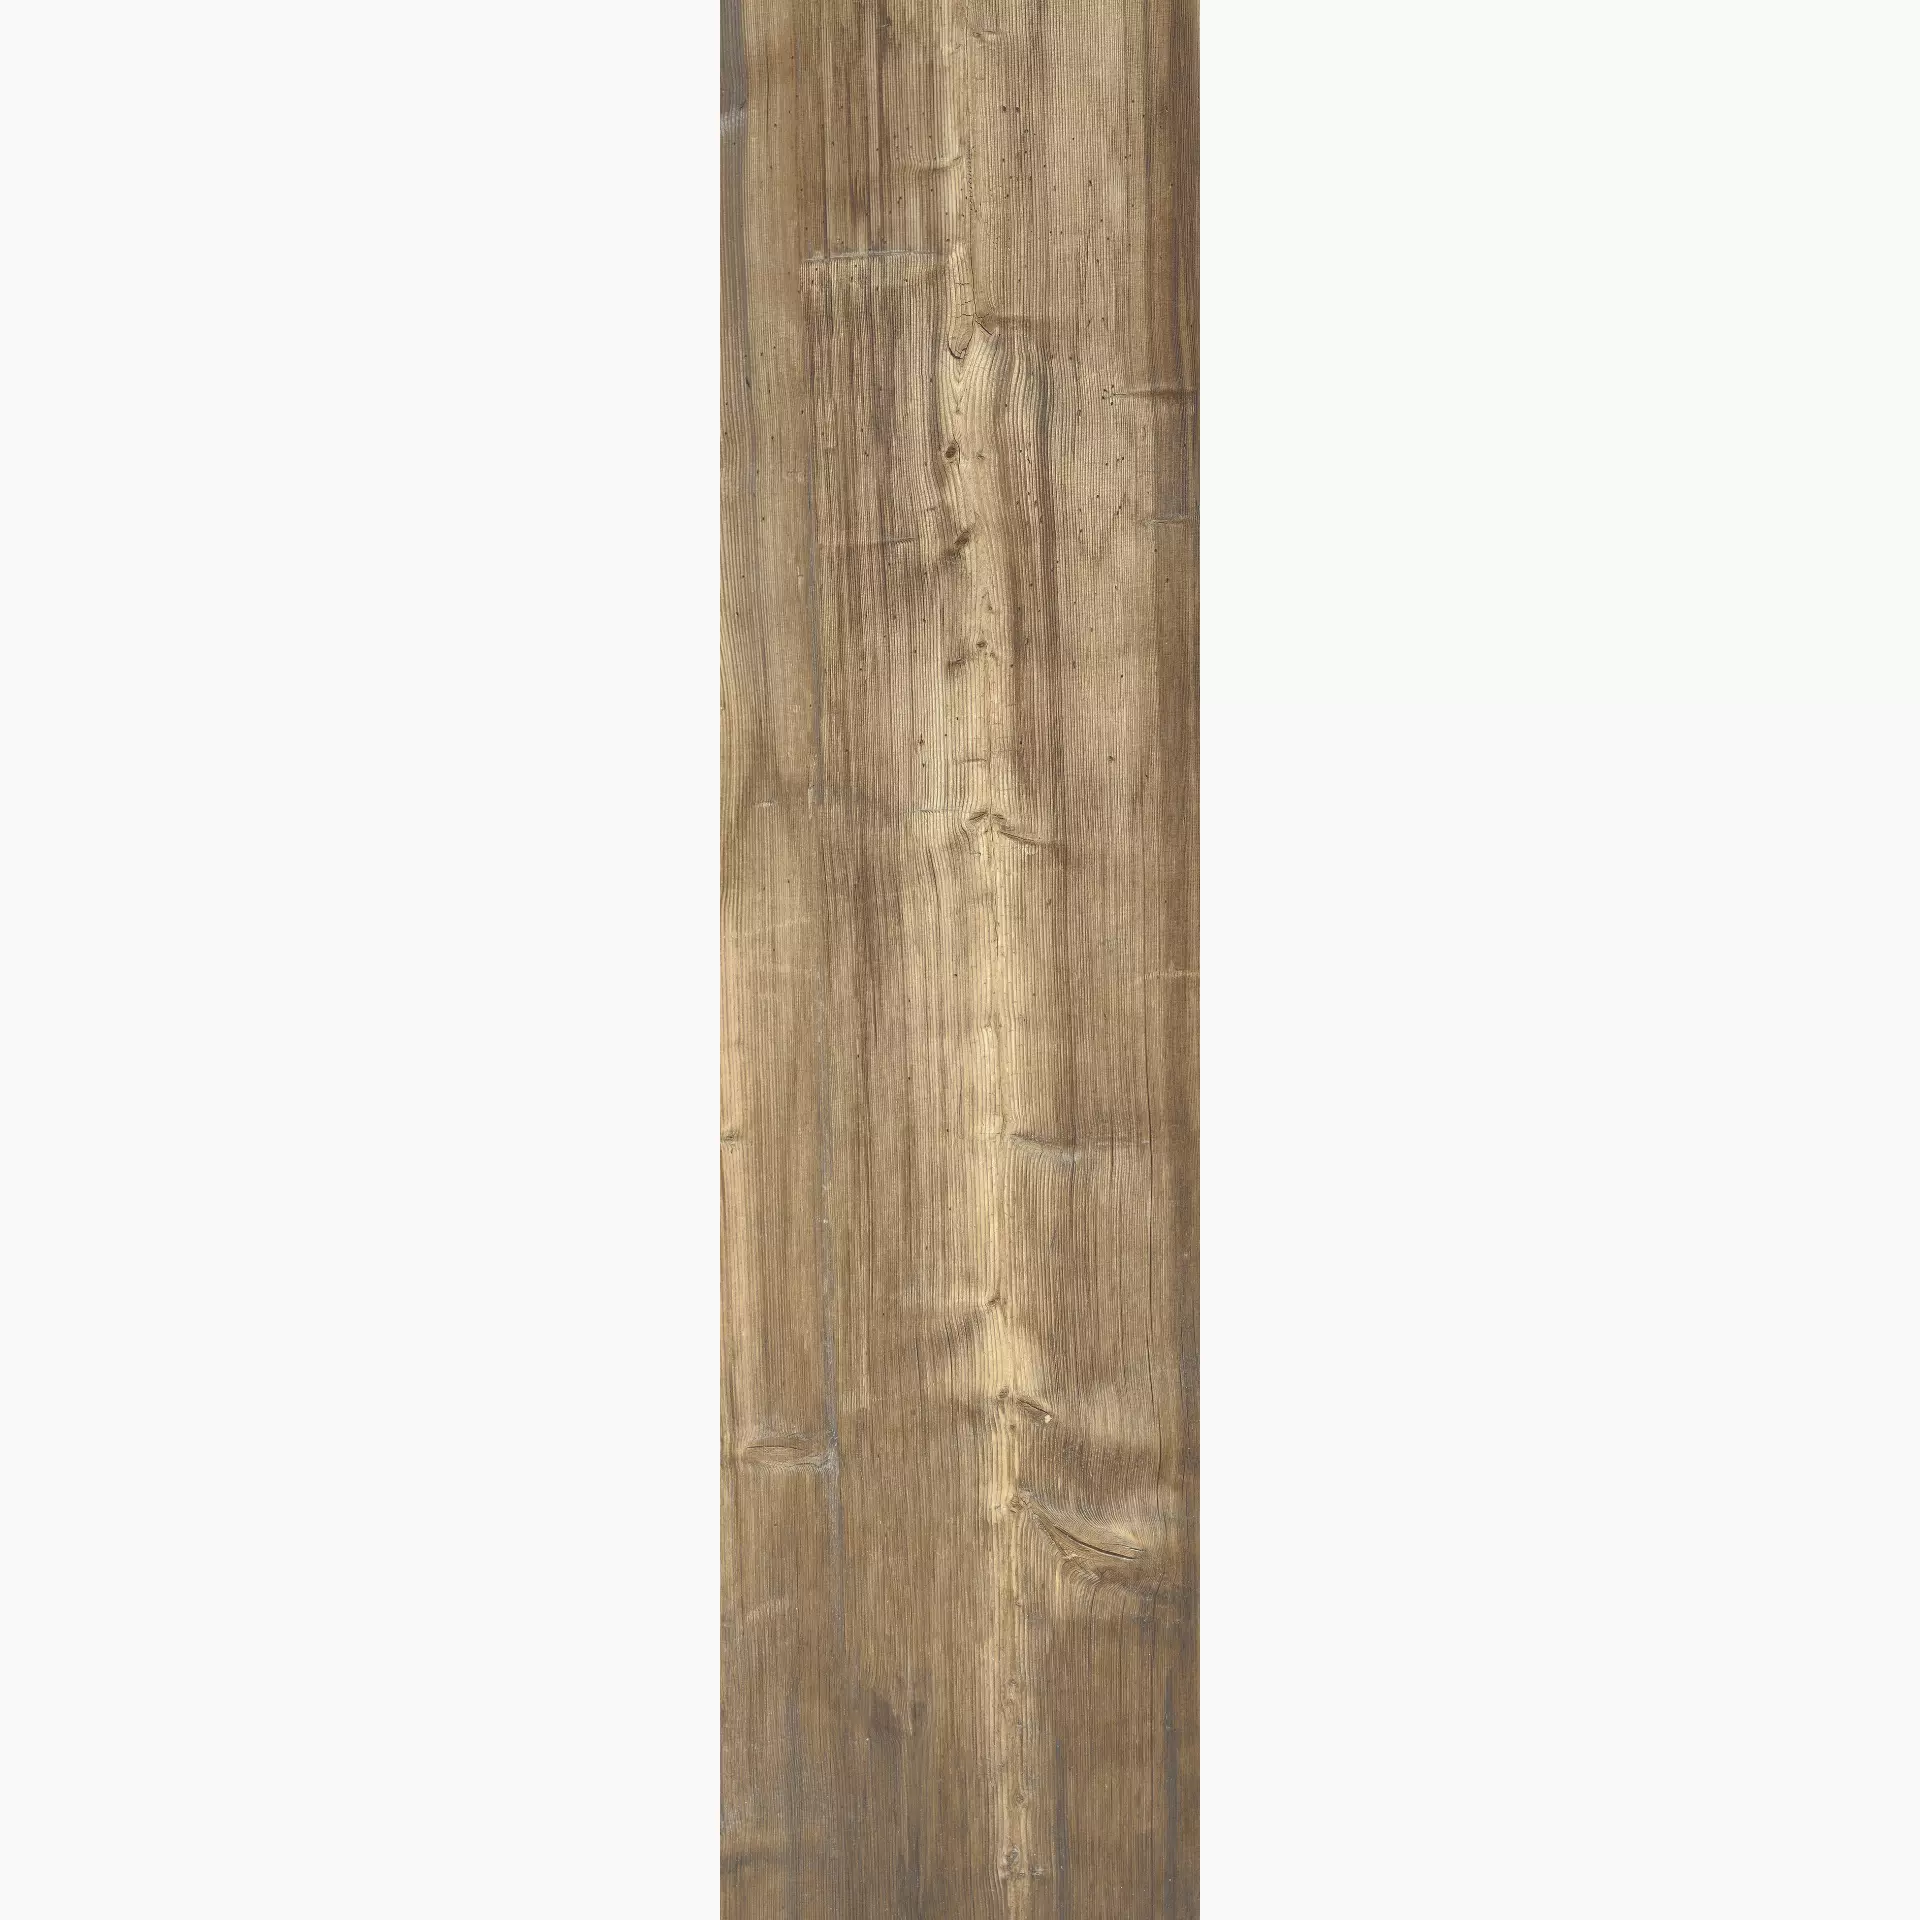 Refin Larix Natural Out 2.0 OM05 30x120cm rectified 20mm